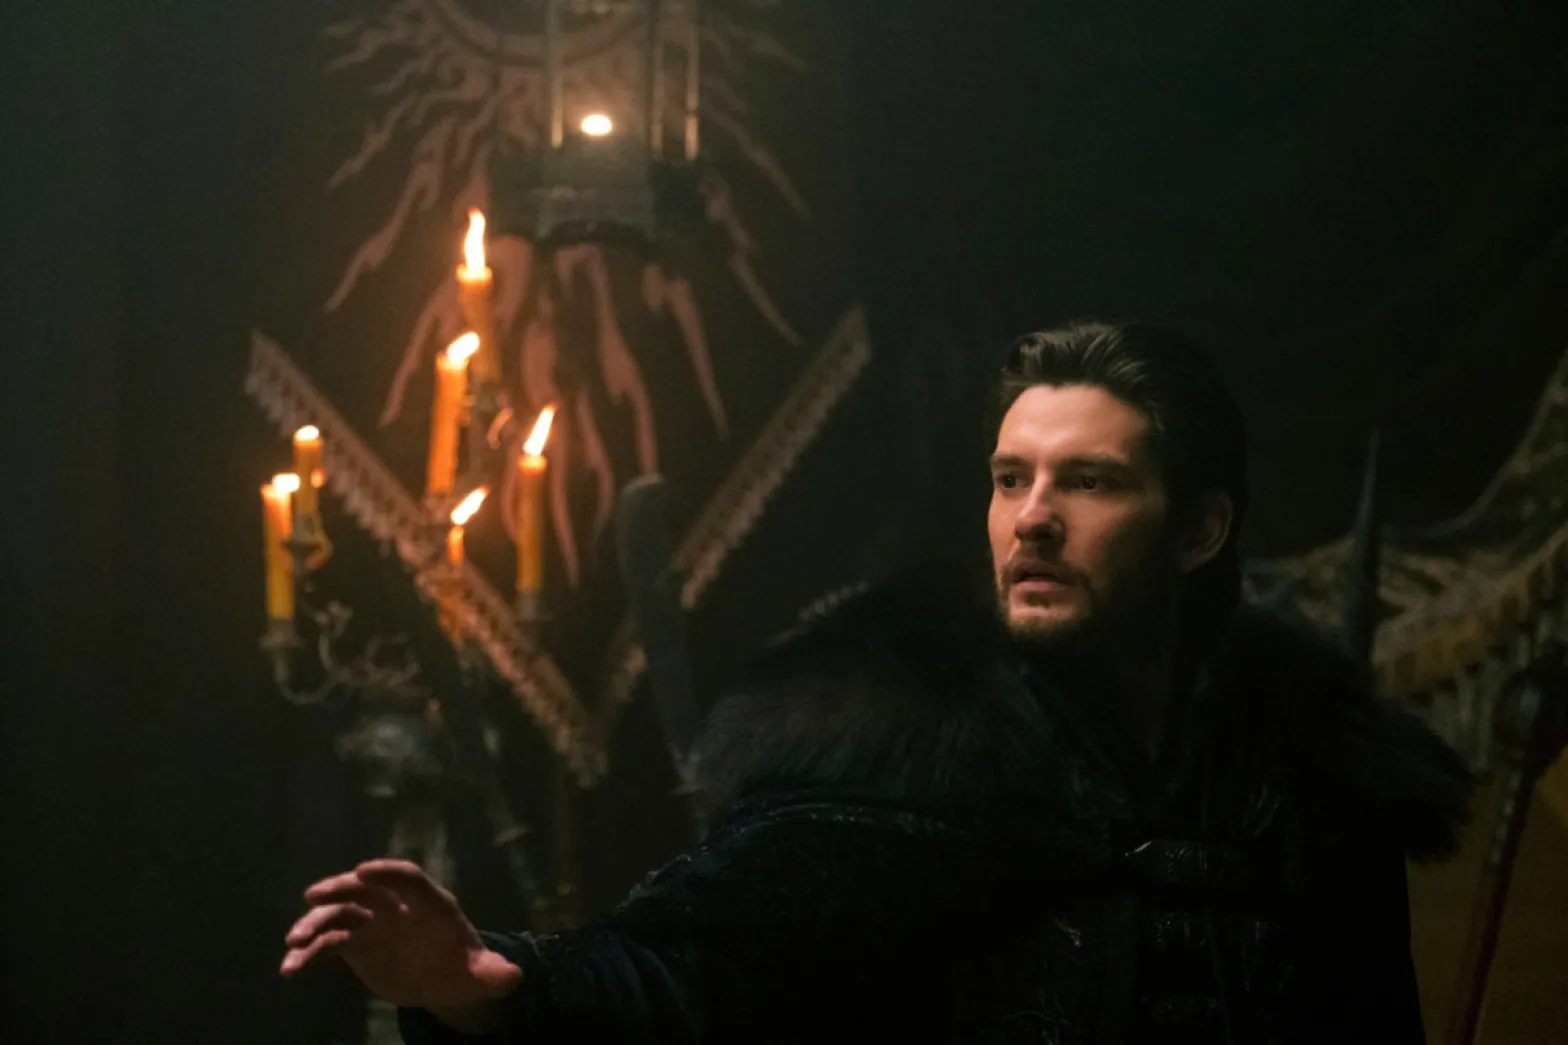 The Darkling, played by Ben Barnes, as he appears in the second season of Shadow and Bone on Netflix